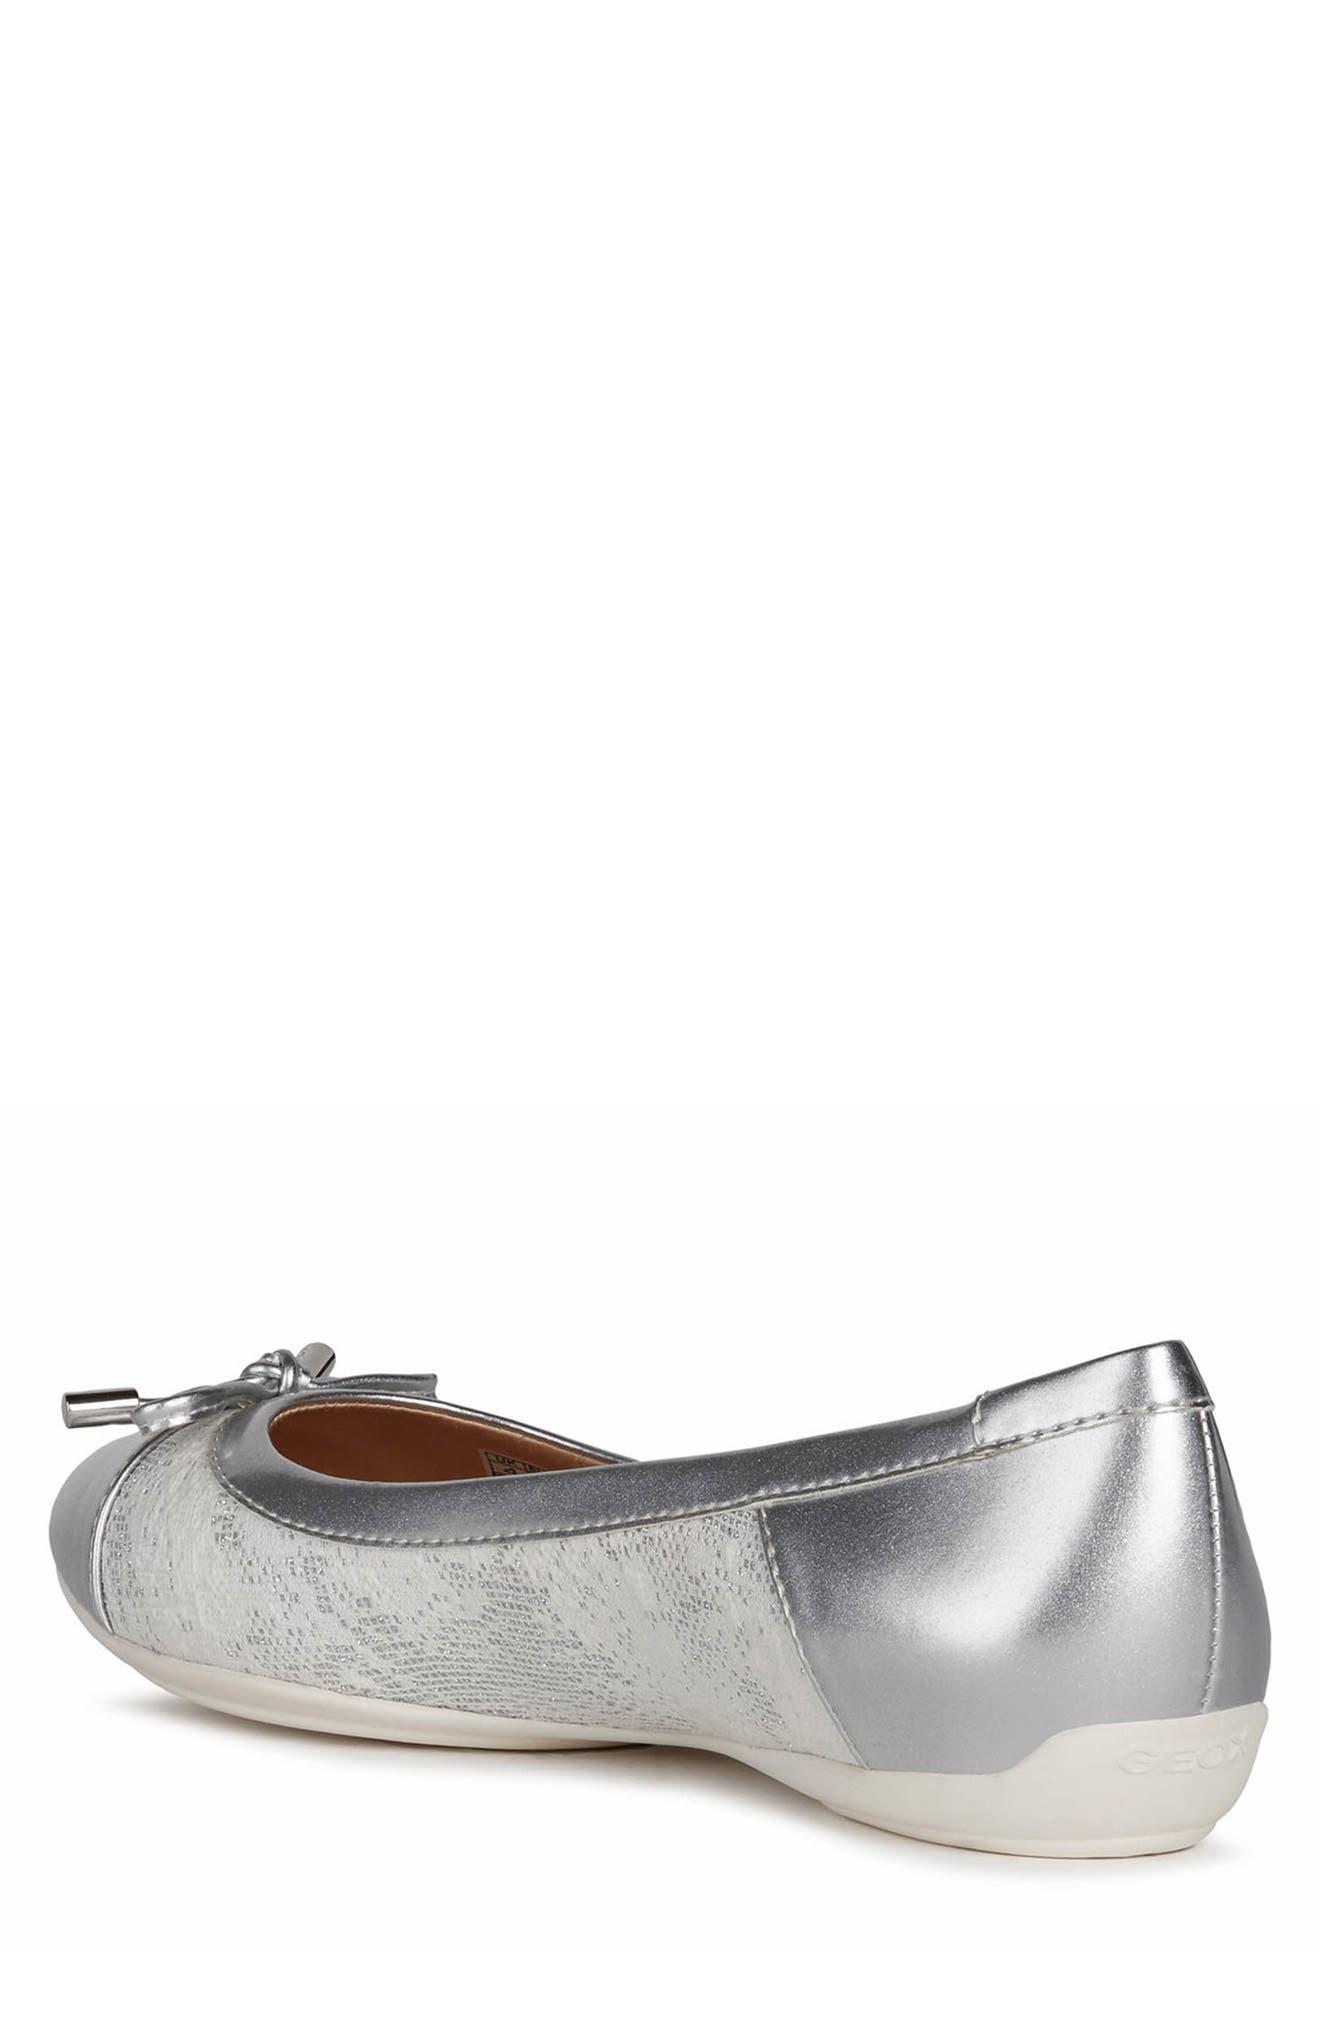 Geox Charlene Leather Panel Bow Flat in White | Lyst